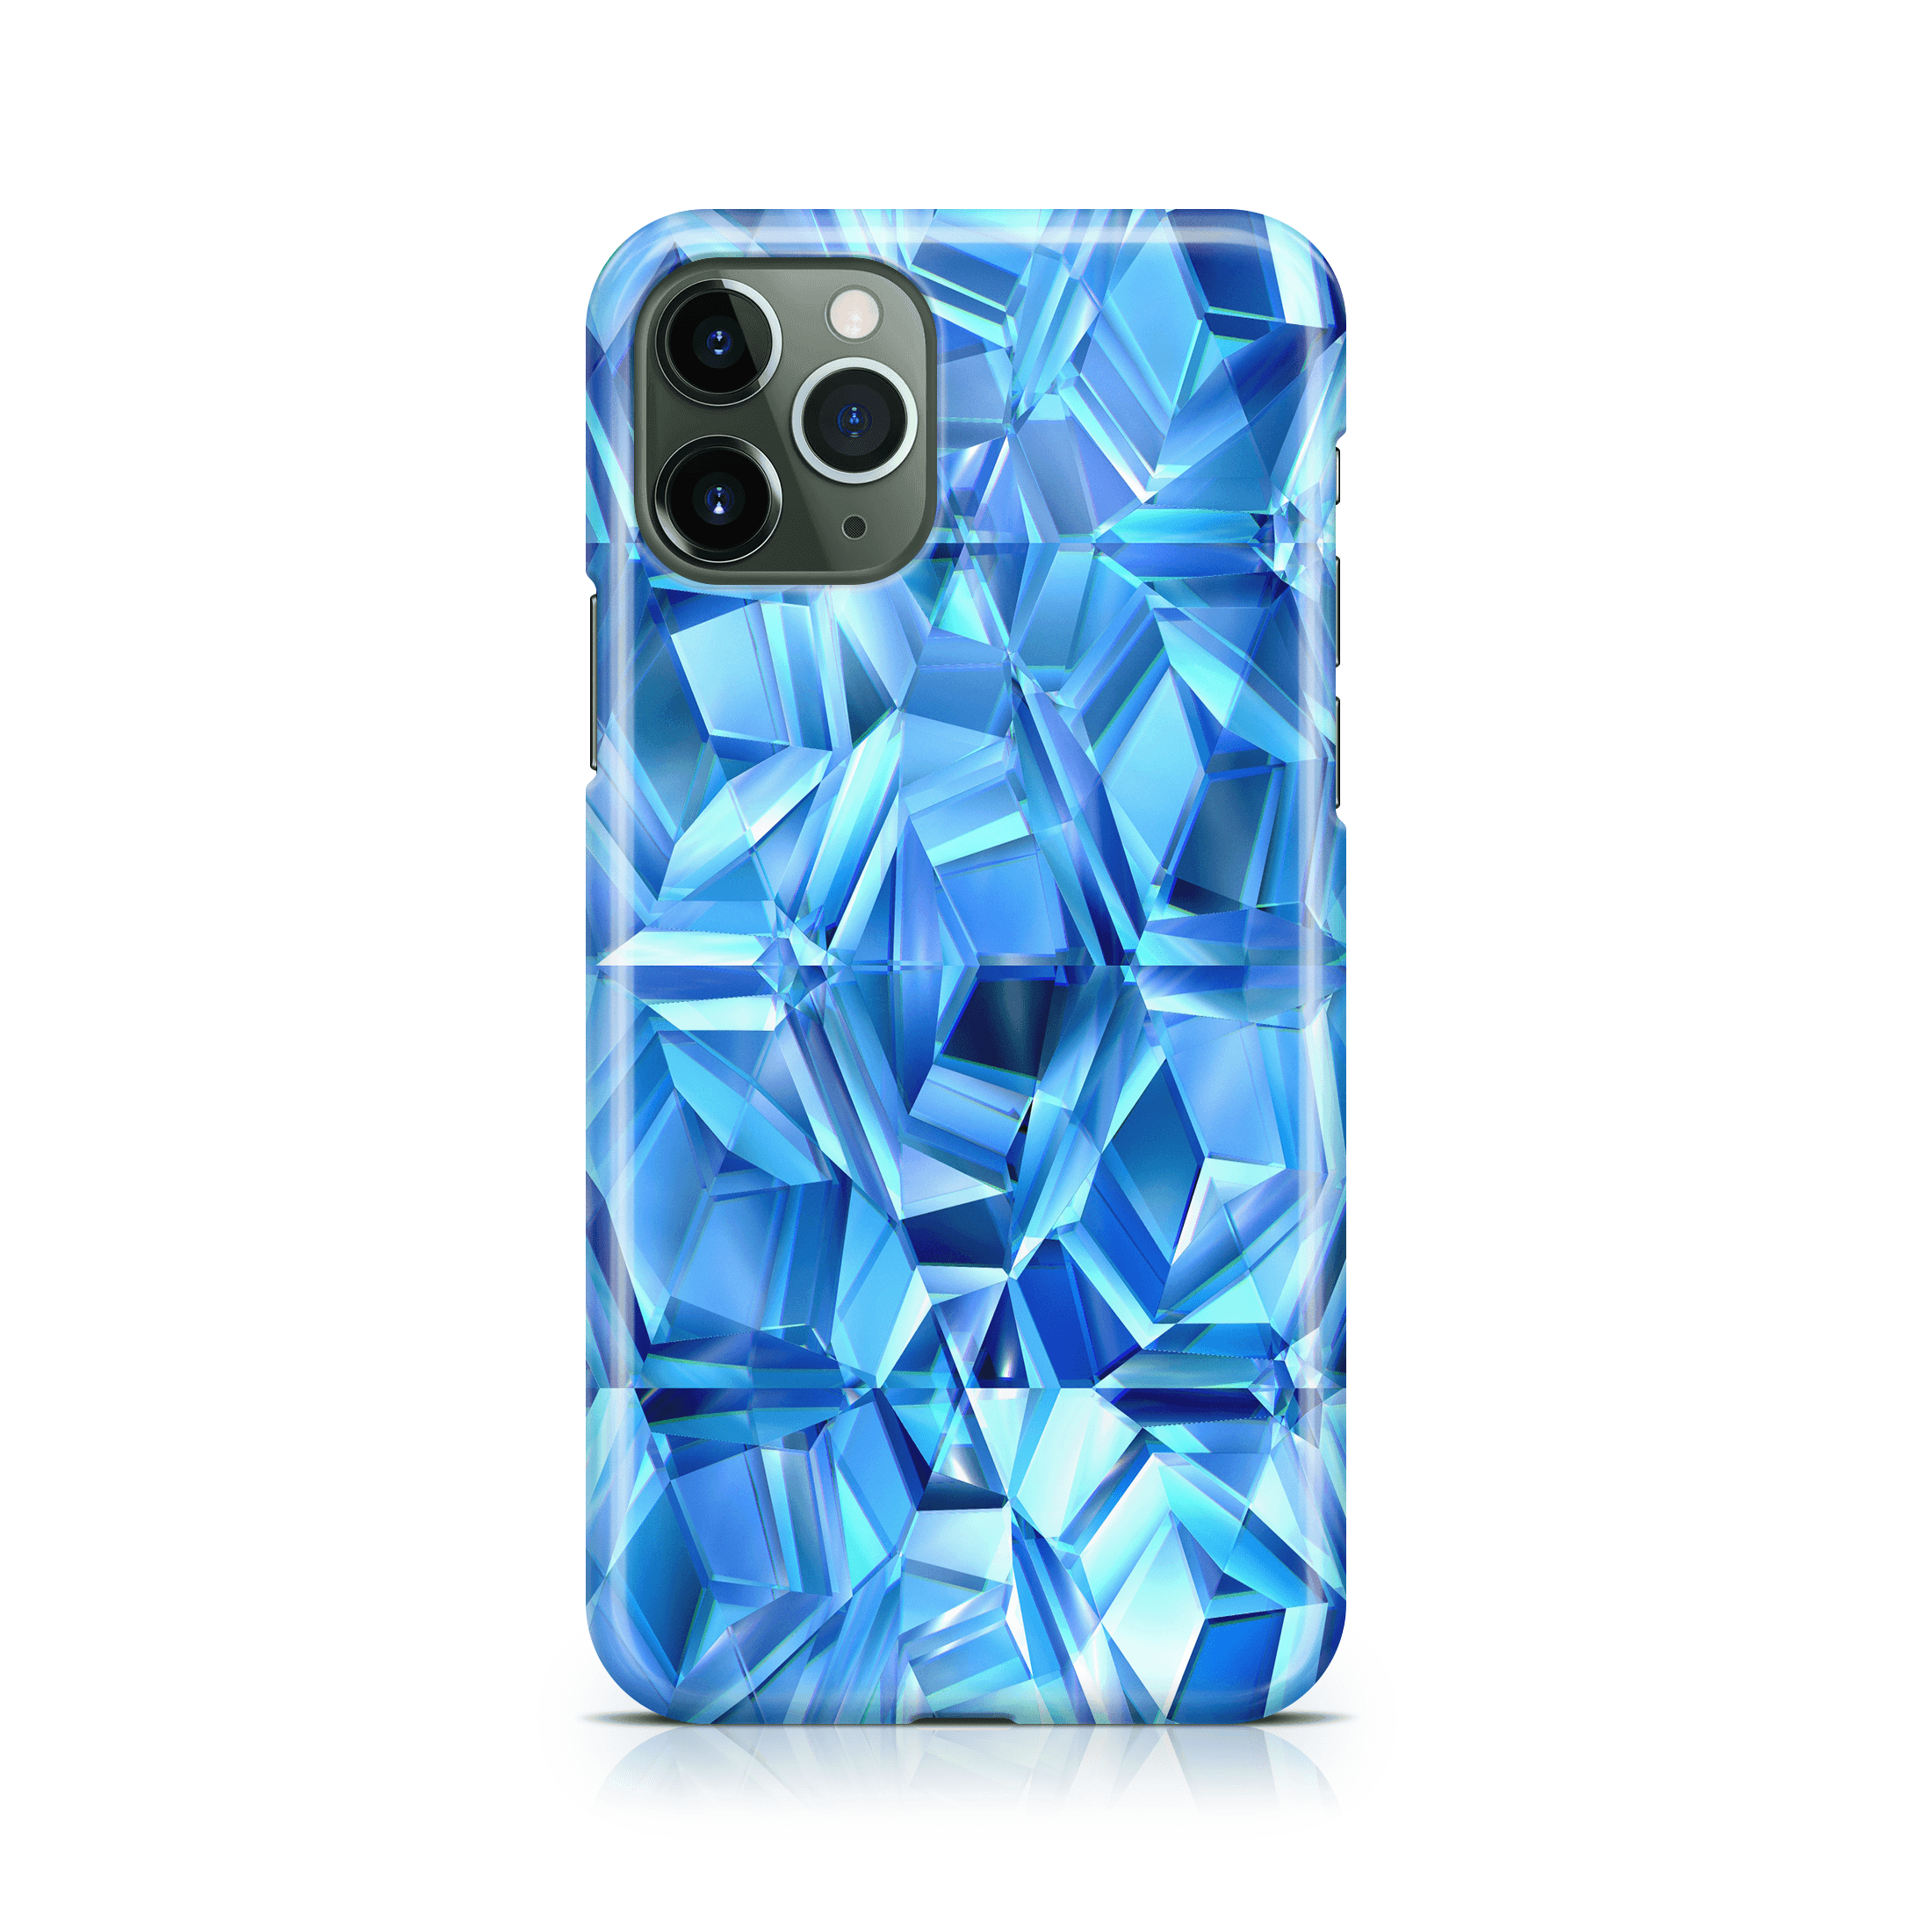 Blue Zircon - iPhone phone case designs by CaseSwagger